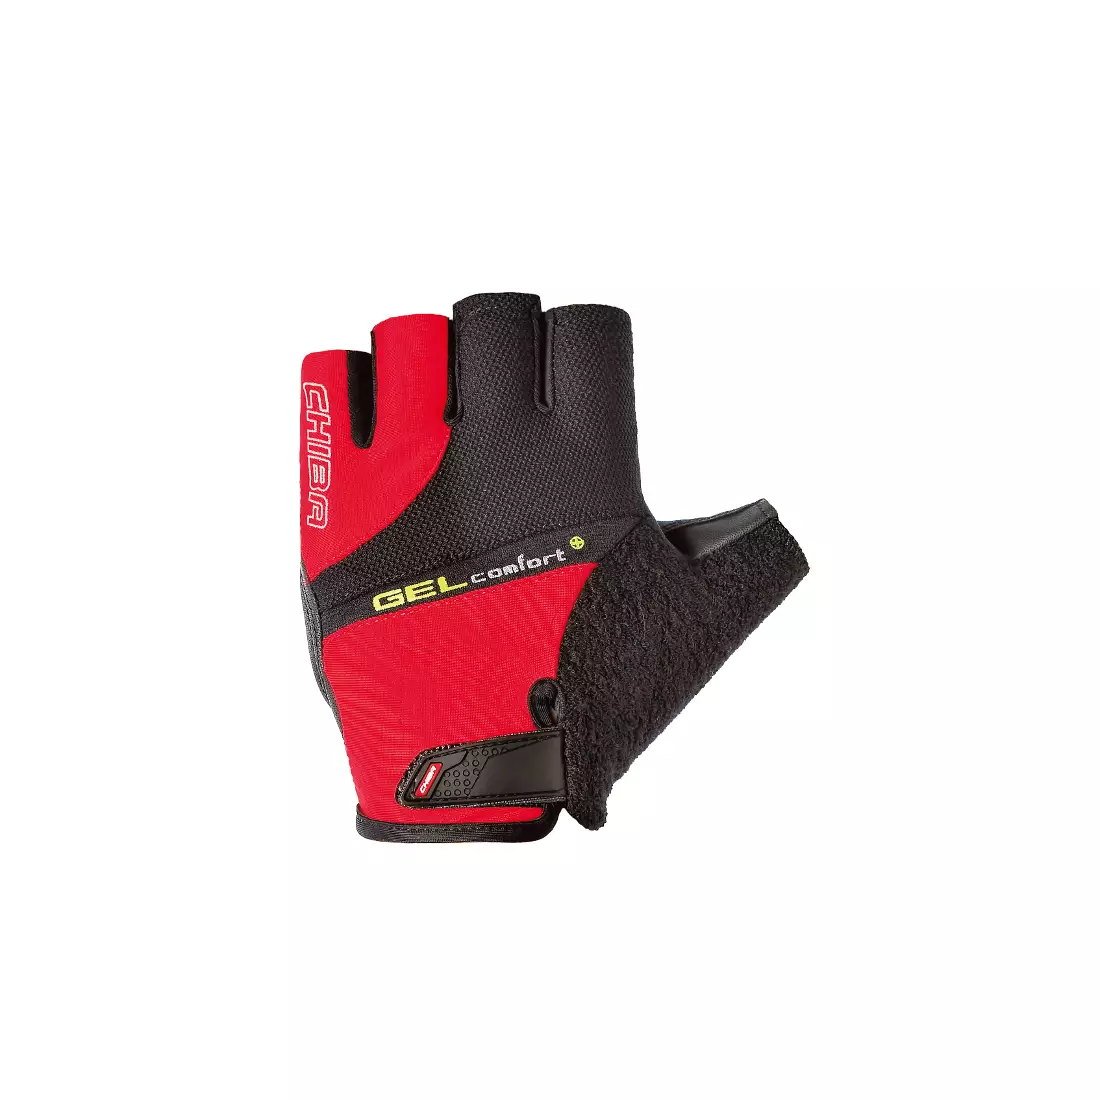 CHIBA GEL COMFORT PLUS cycling gloves, red